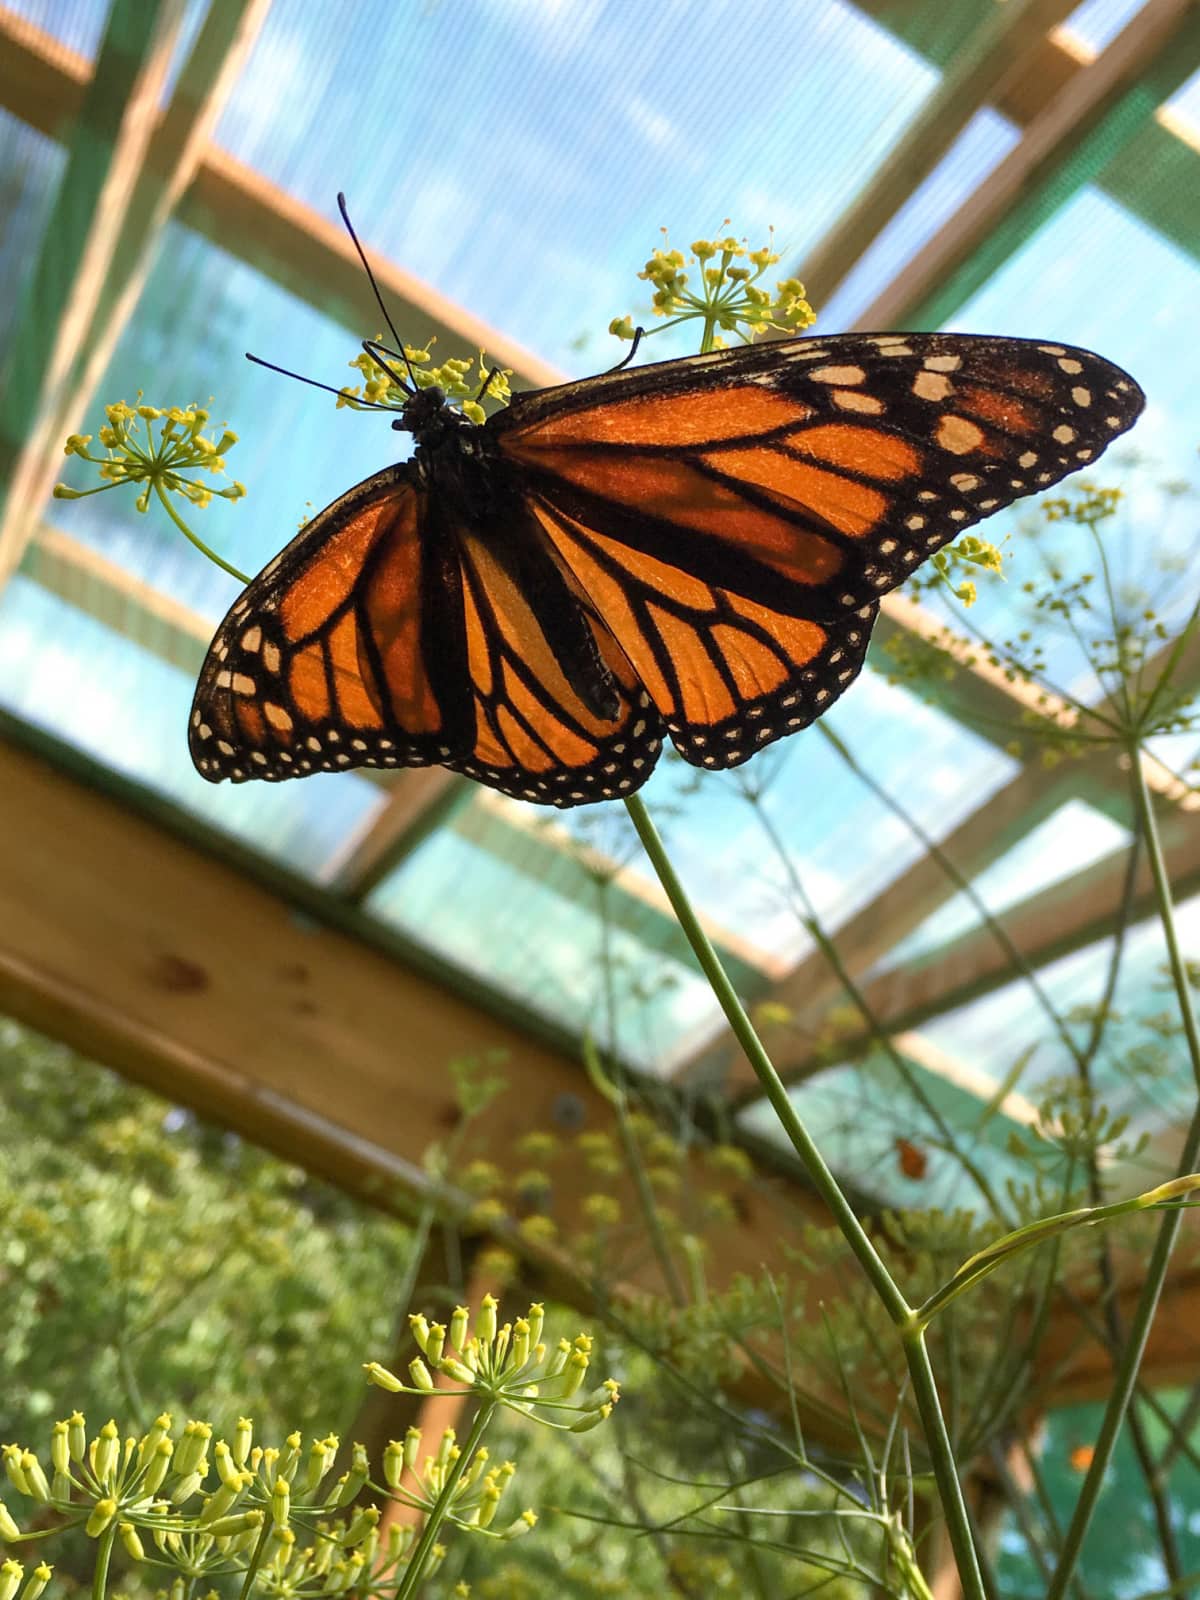 Monarch butterfly at Up Yonda Farm